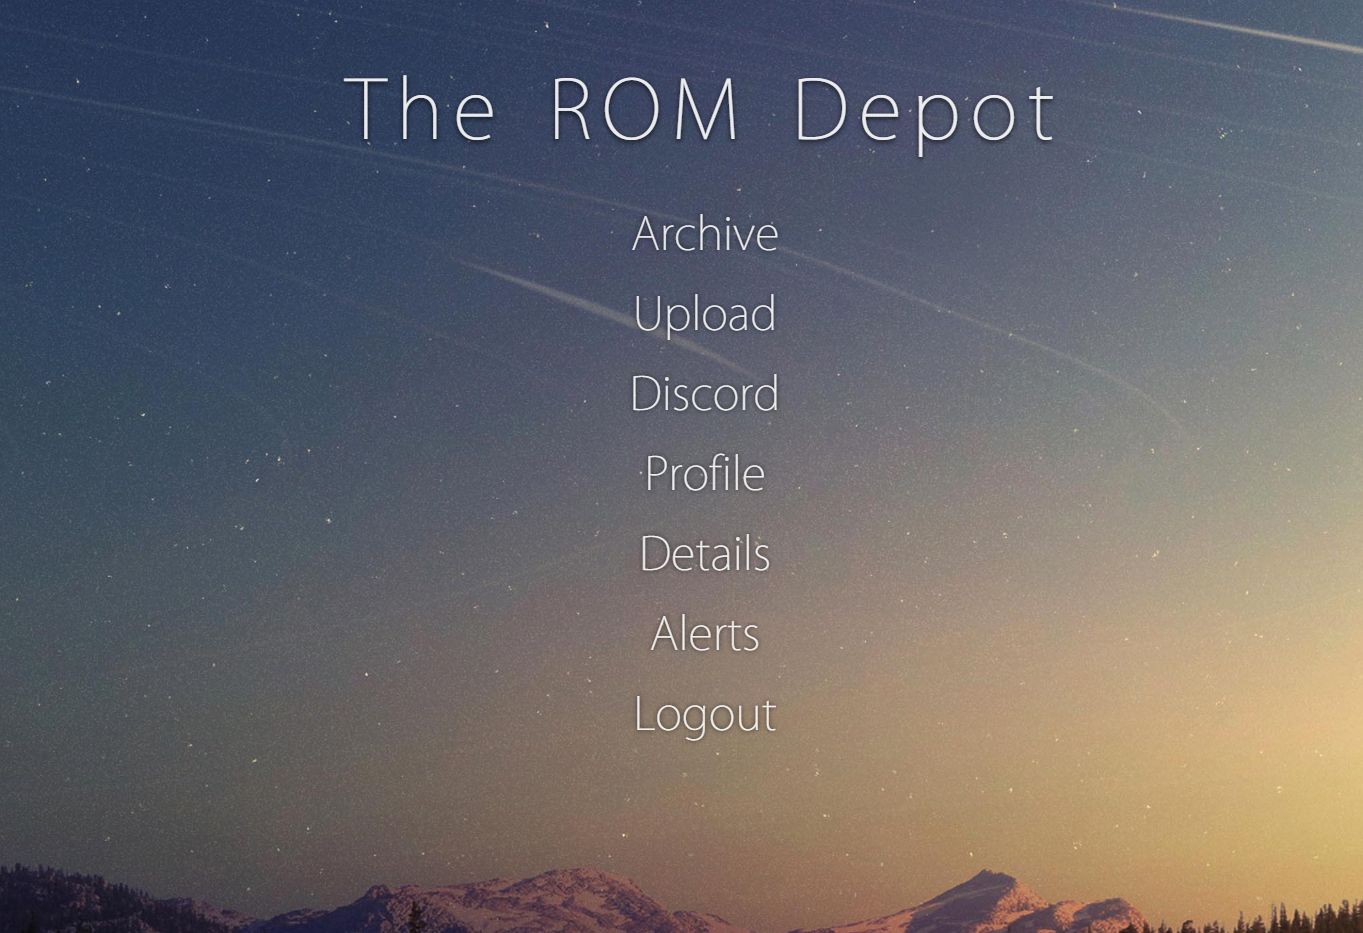 The ROM Depot: Reviews, Features, Pricing & Download